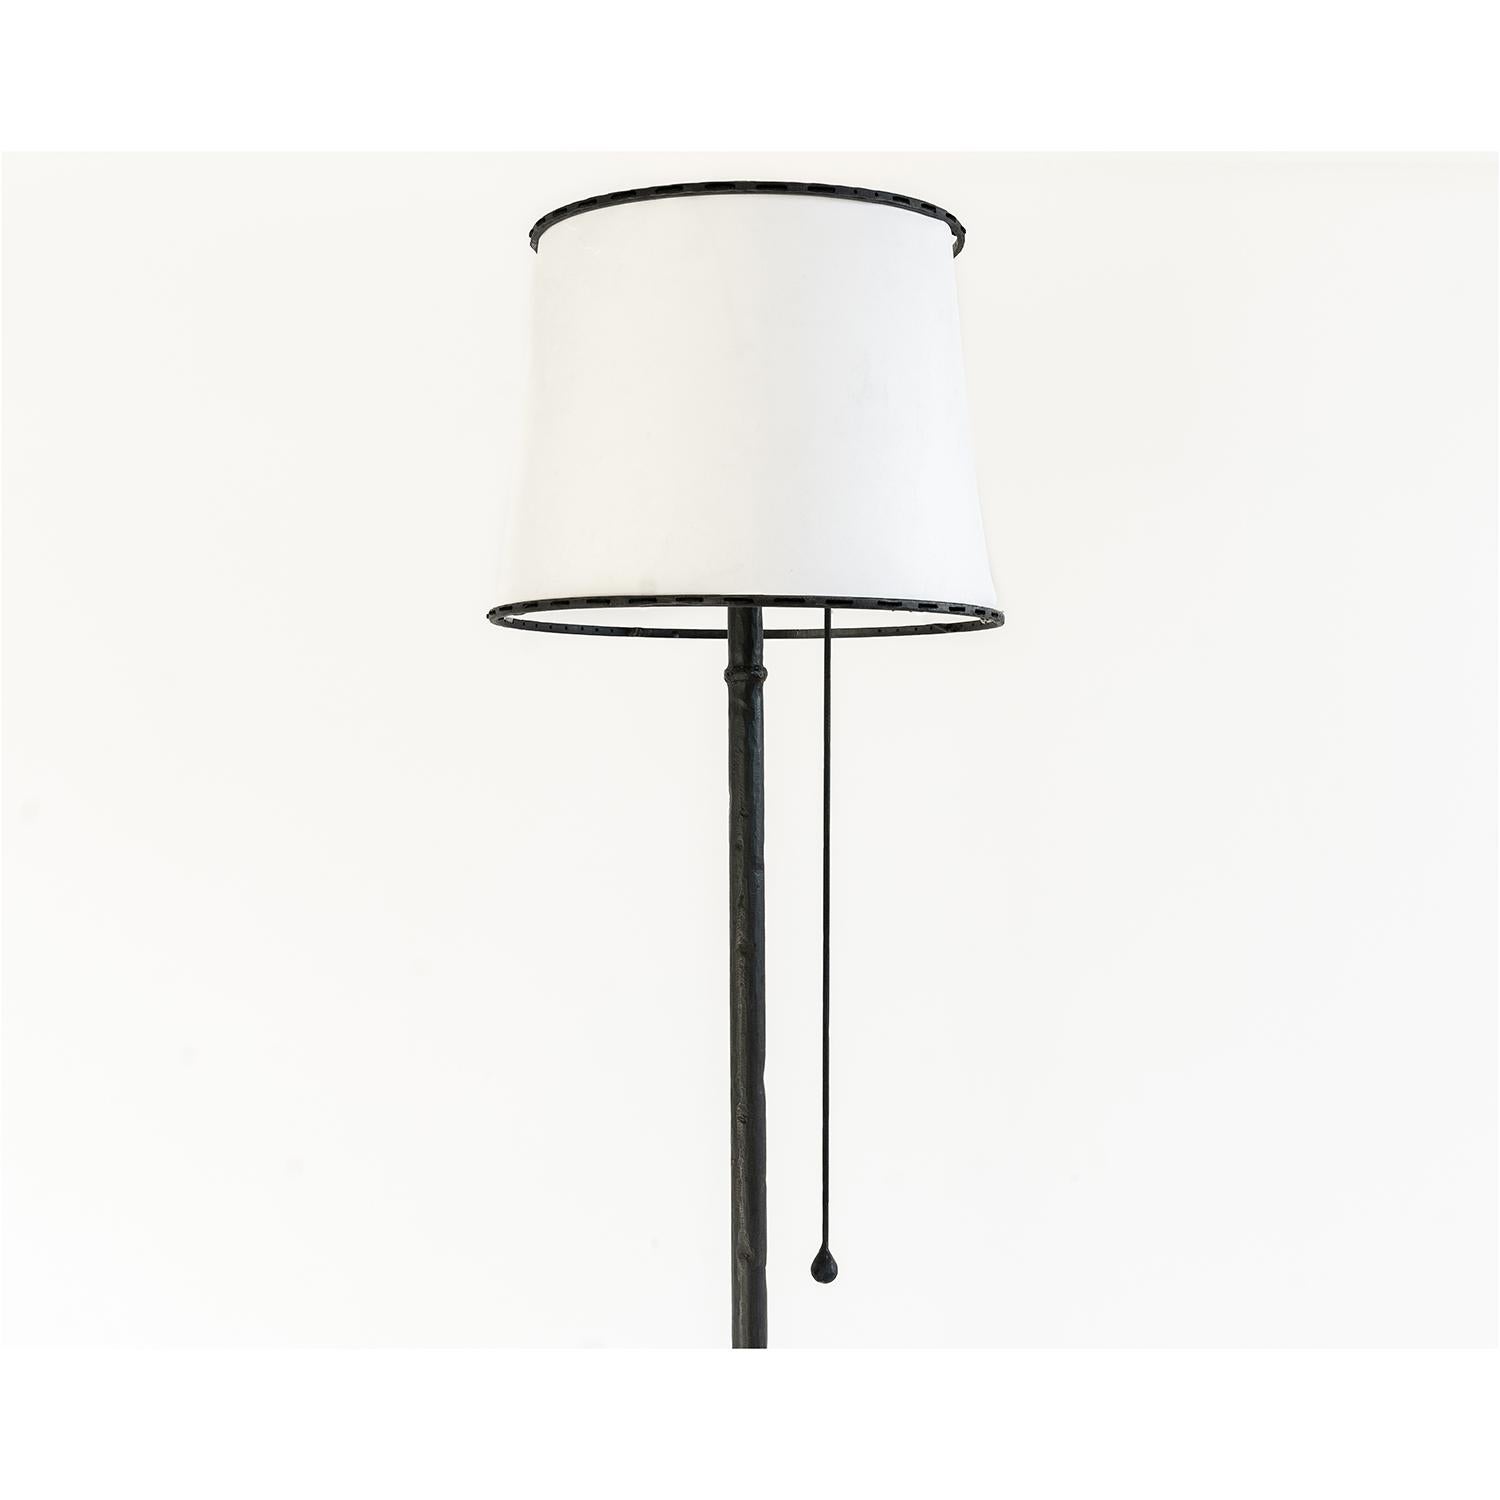 LAMP NO. 1 
J.M. Szymanski
d. 2020

This special floor lamp features a linen shade and a carved steel base. A single tear drop pull is used to operate the lamp. 

Custom sizes available. Made in the Bronx, New York, USA.

Our products are fabricated